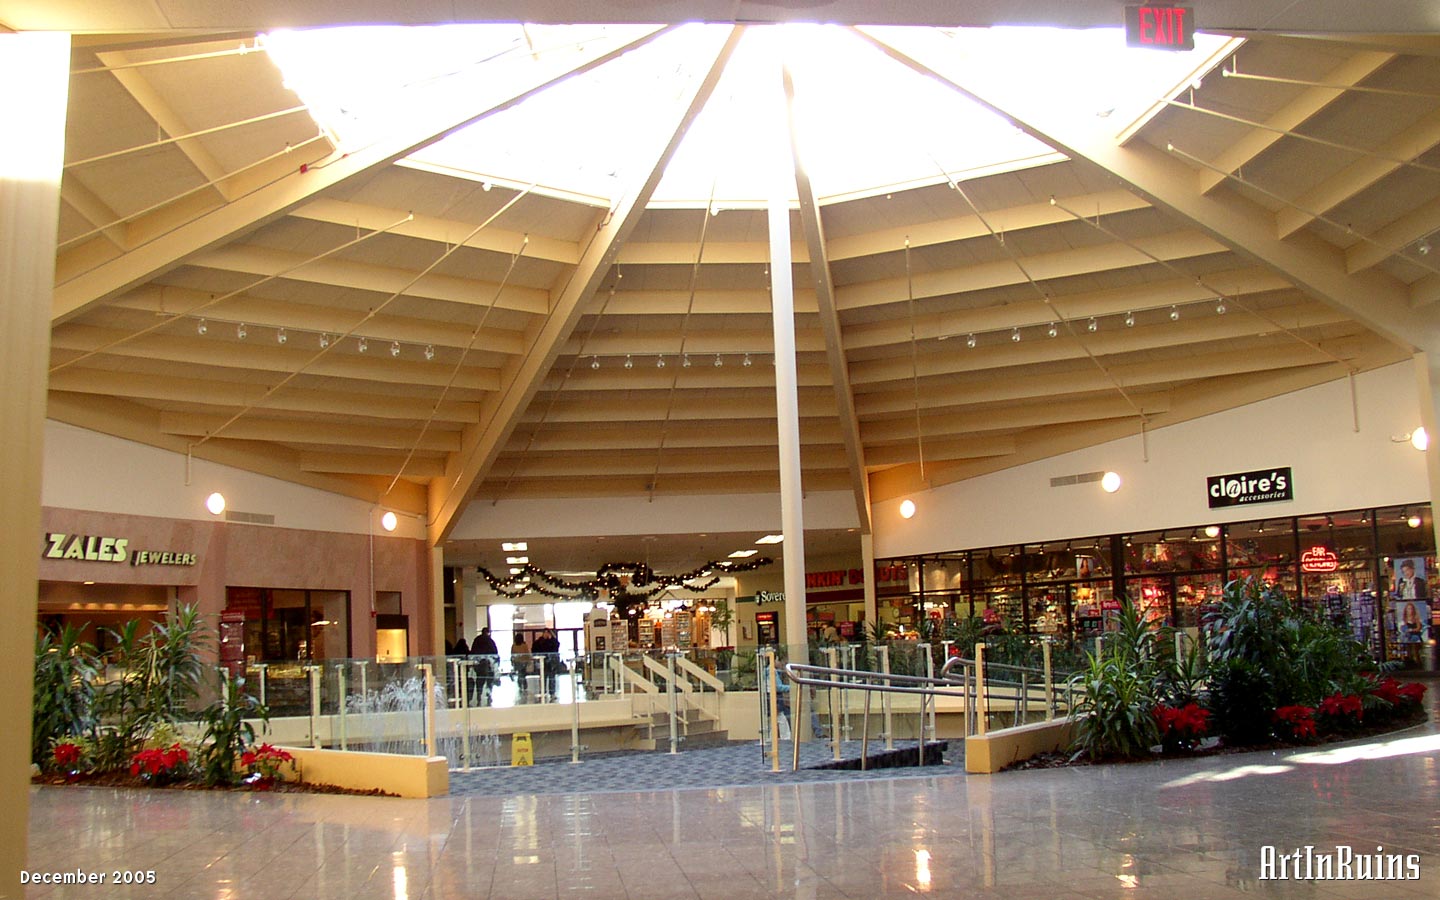 A fairly typical 1970s mall in the suburban town of Lincoln, RI. Originally built as two wings with an anchor on each end centered around a rotunda-style atrium, the wings have been shortened dramatically as retail anchors have turned their back to the mall and faced the parking lots.